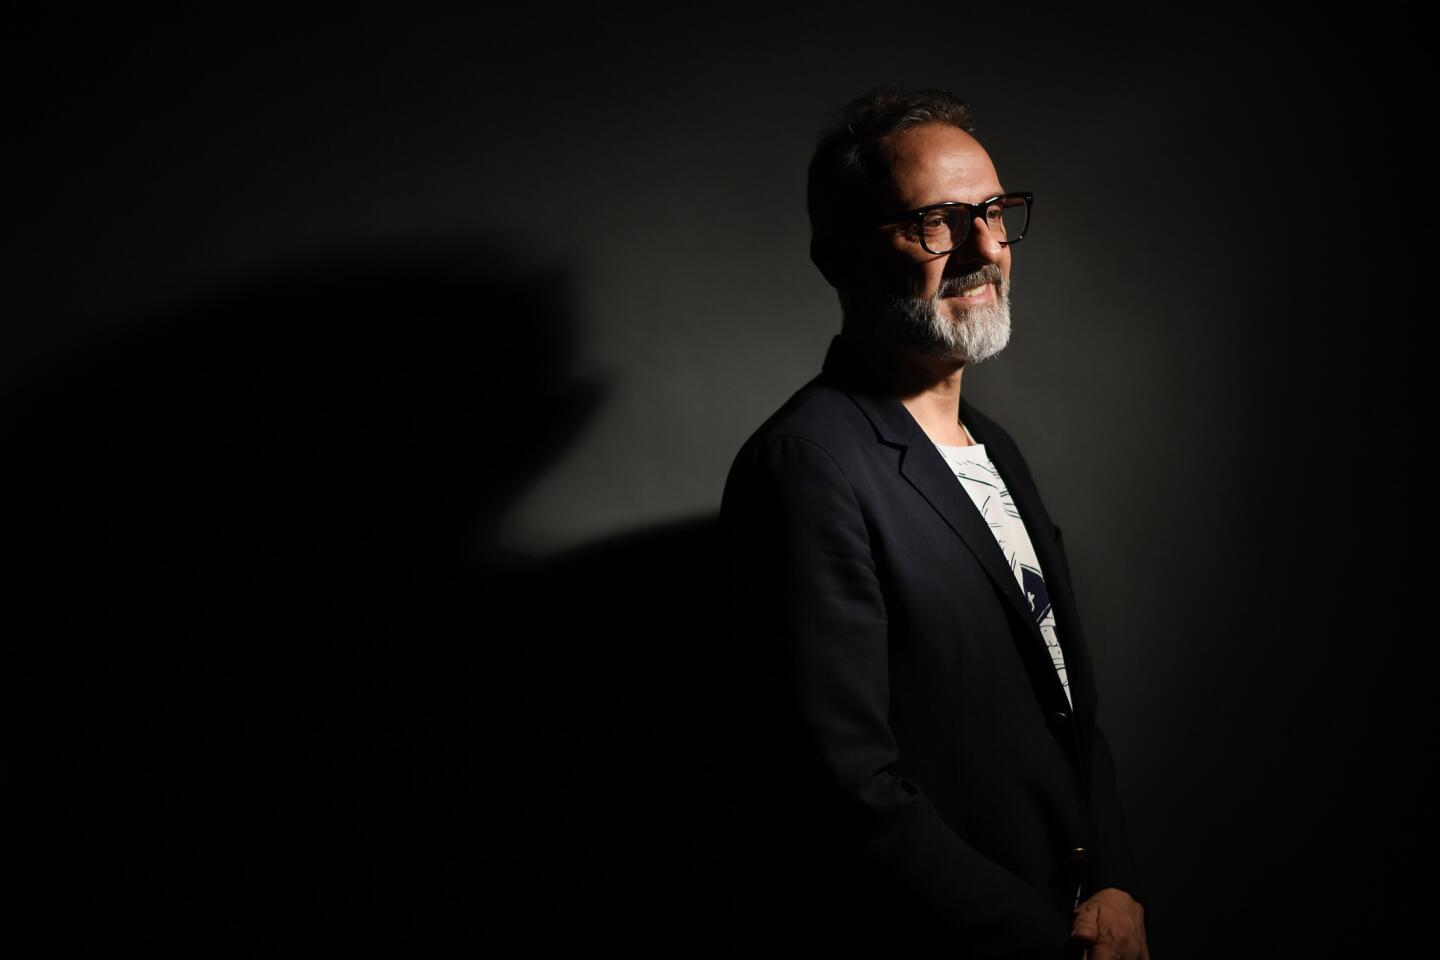 Italian chef Massimo Bottura won first place in the World's 50 Best Restaurants awards.